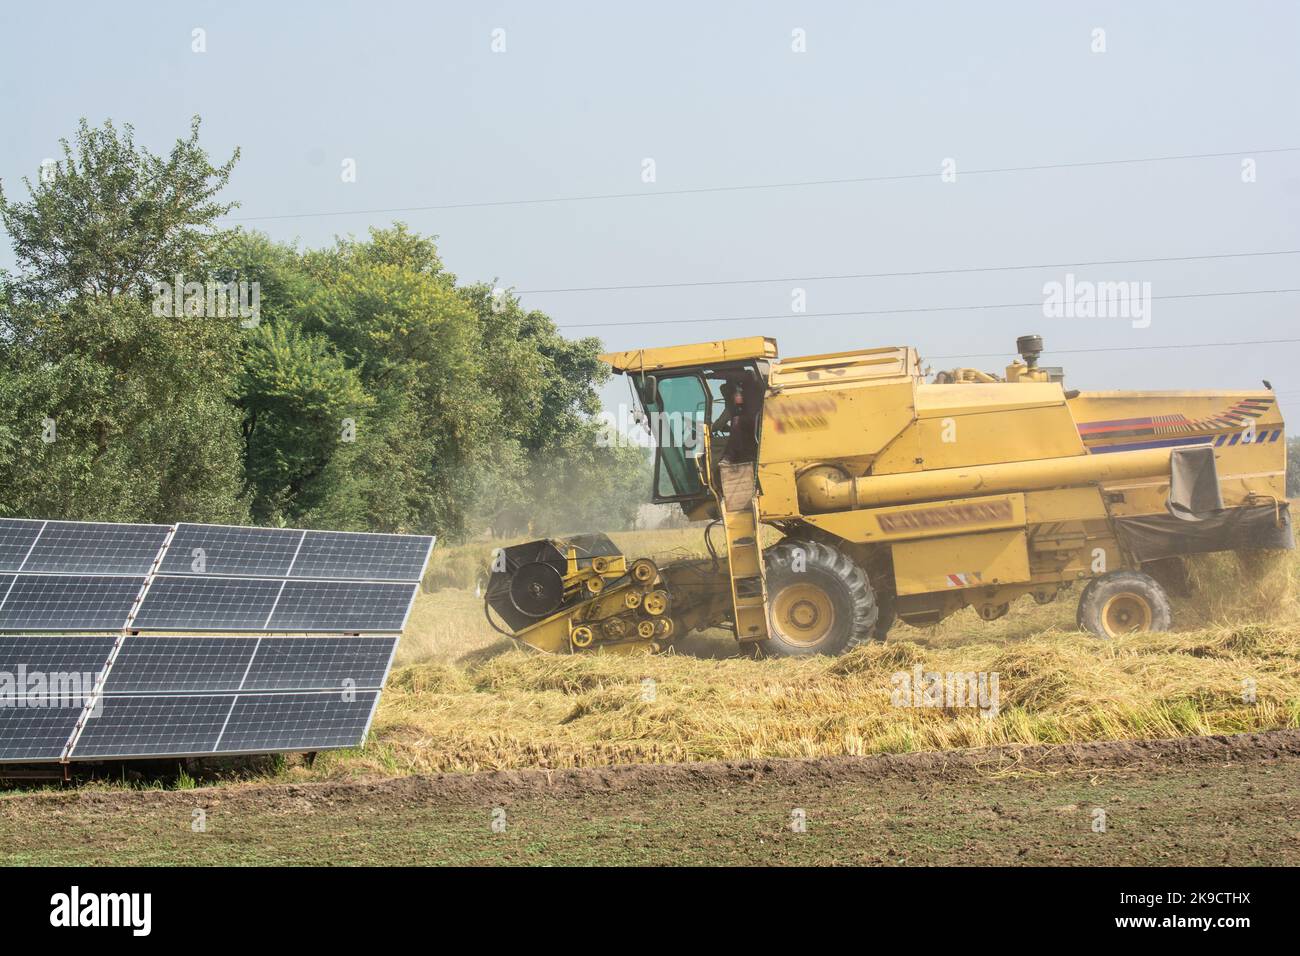 Solar powered irrigation system and combine harvester in the field Stock Photo